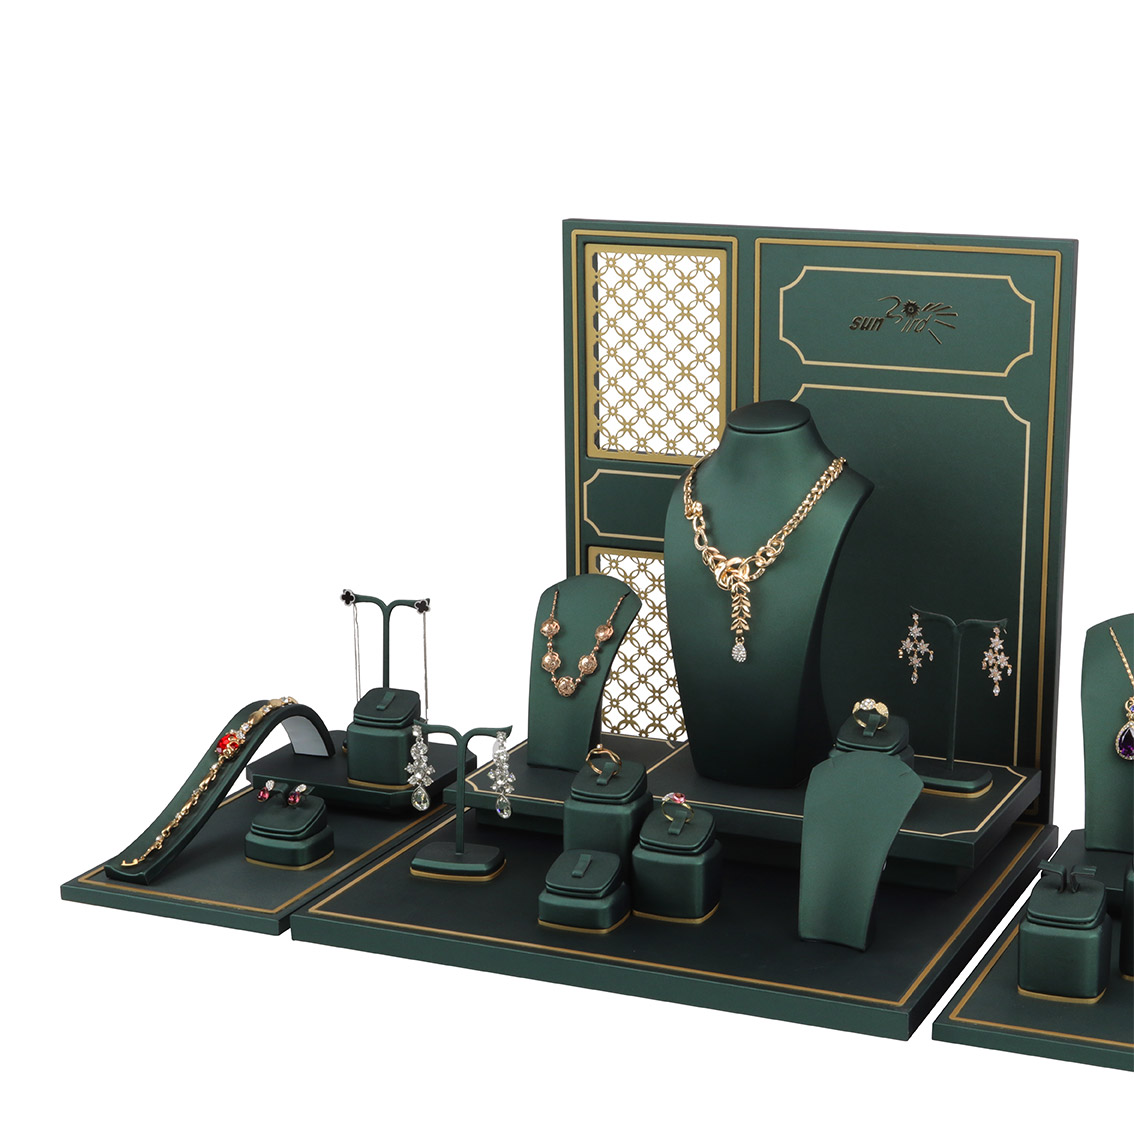 PC20003 Custom Exquisite And High-quality Jewelry Display Set With Green PU And Champagne Gold Trim